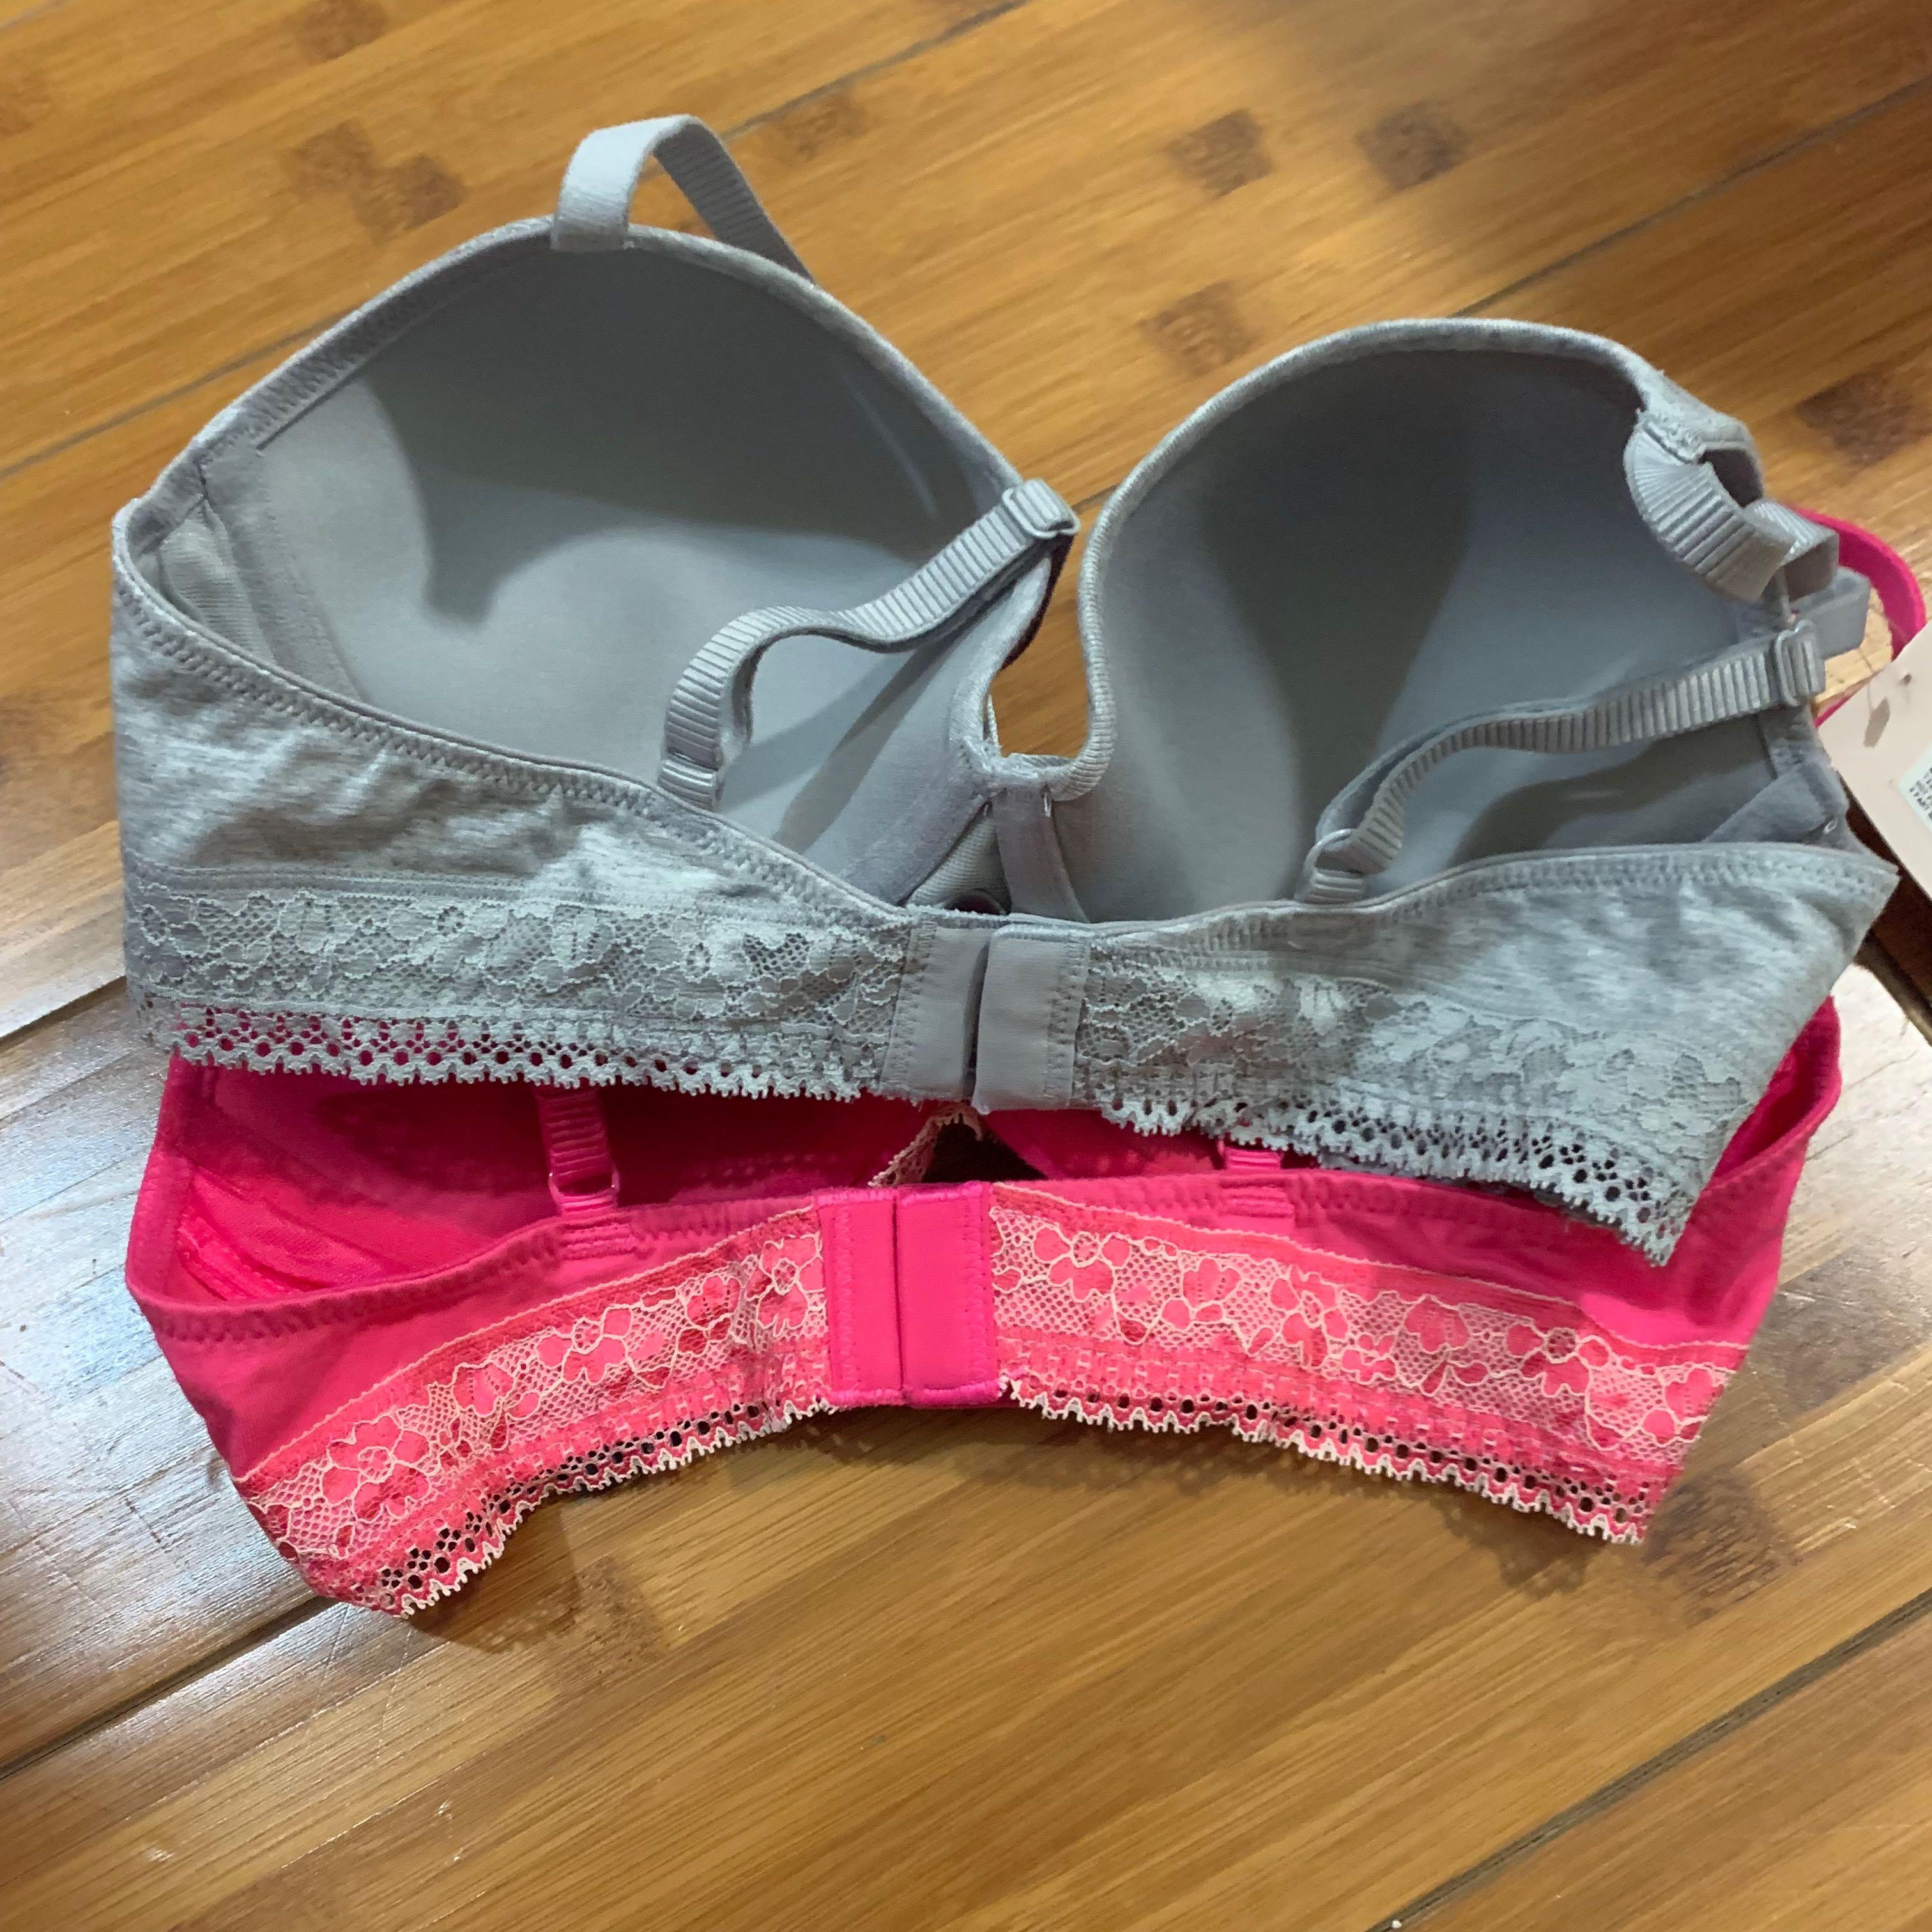 BNWT Marks & Spencer Pair Set of Pink & Grey Lace Trimmed Plunge Cotton Bra